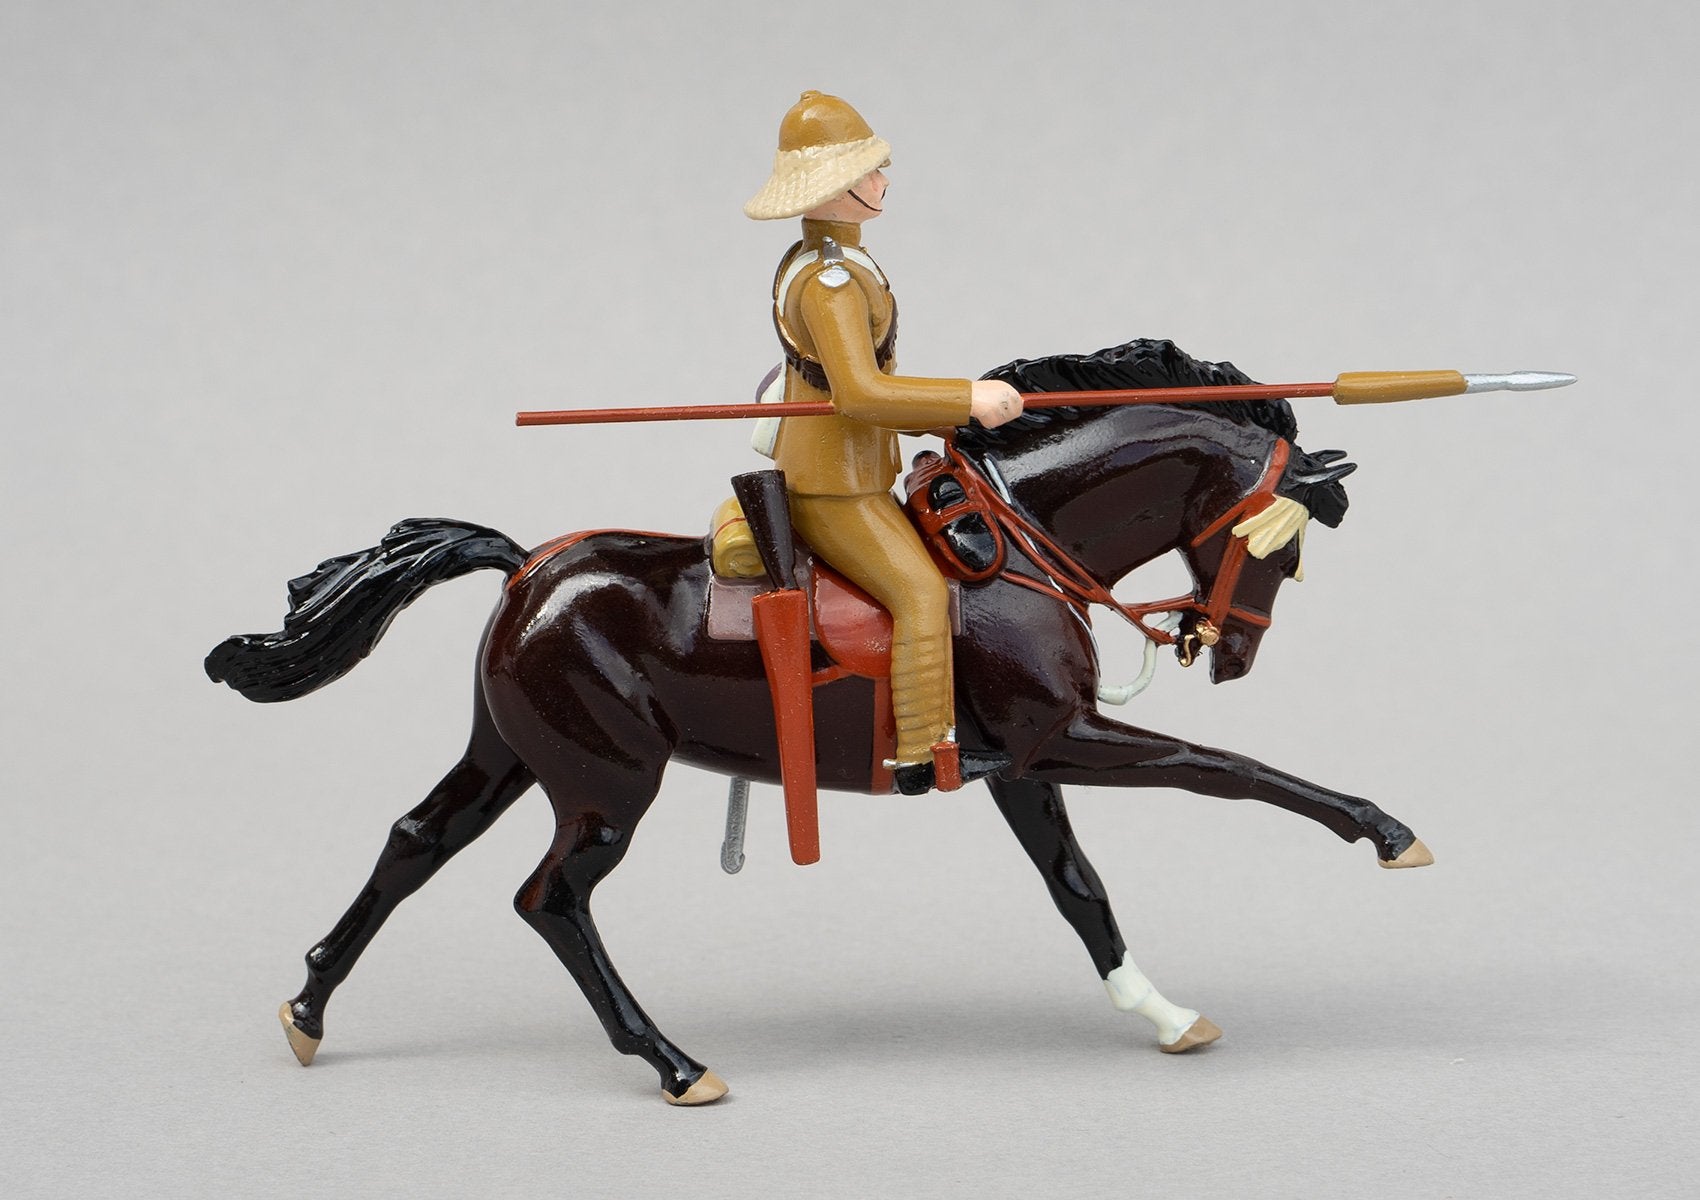 Set 141 21st Lancers, Battle of Omdurman 1898 | British Cavalry | Sudan War | Single mounted khaki cavalry with spear and rifle | Omdurman, Relief of Gordon, Nile River | © Imperial Productions | Sculpt by David Cowe